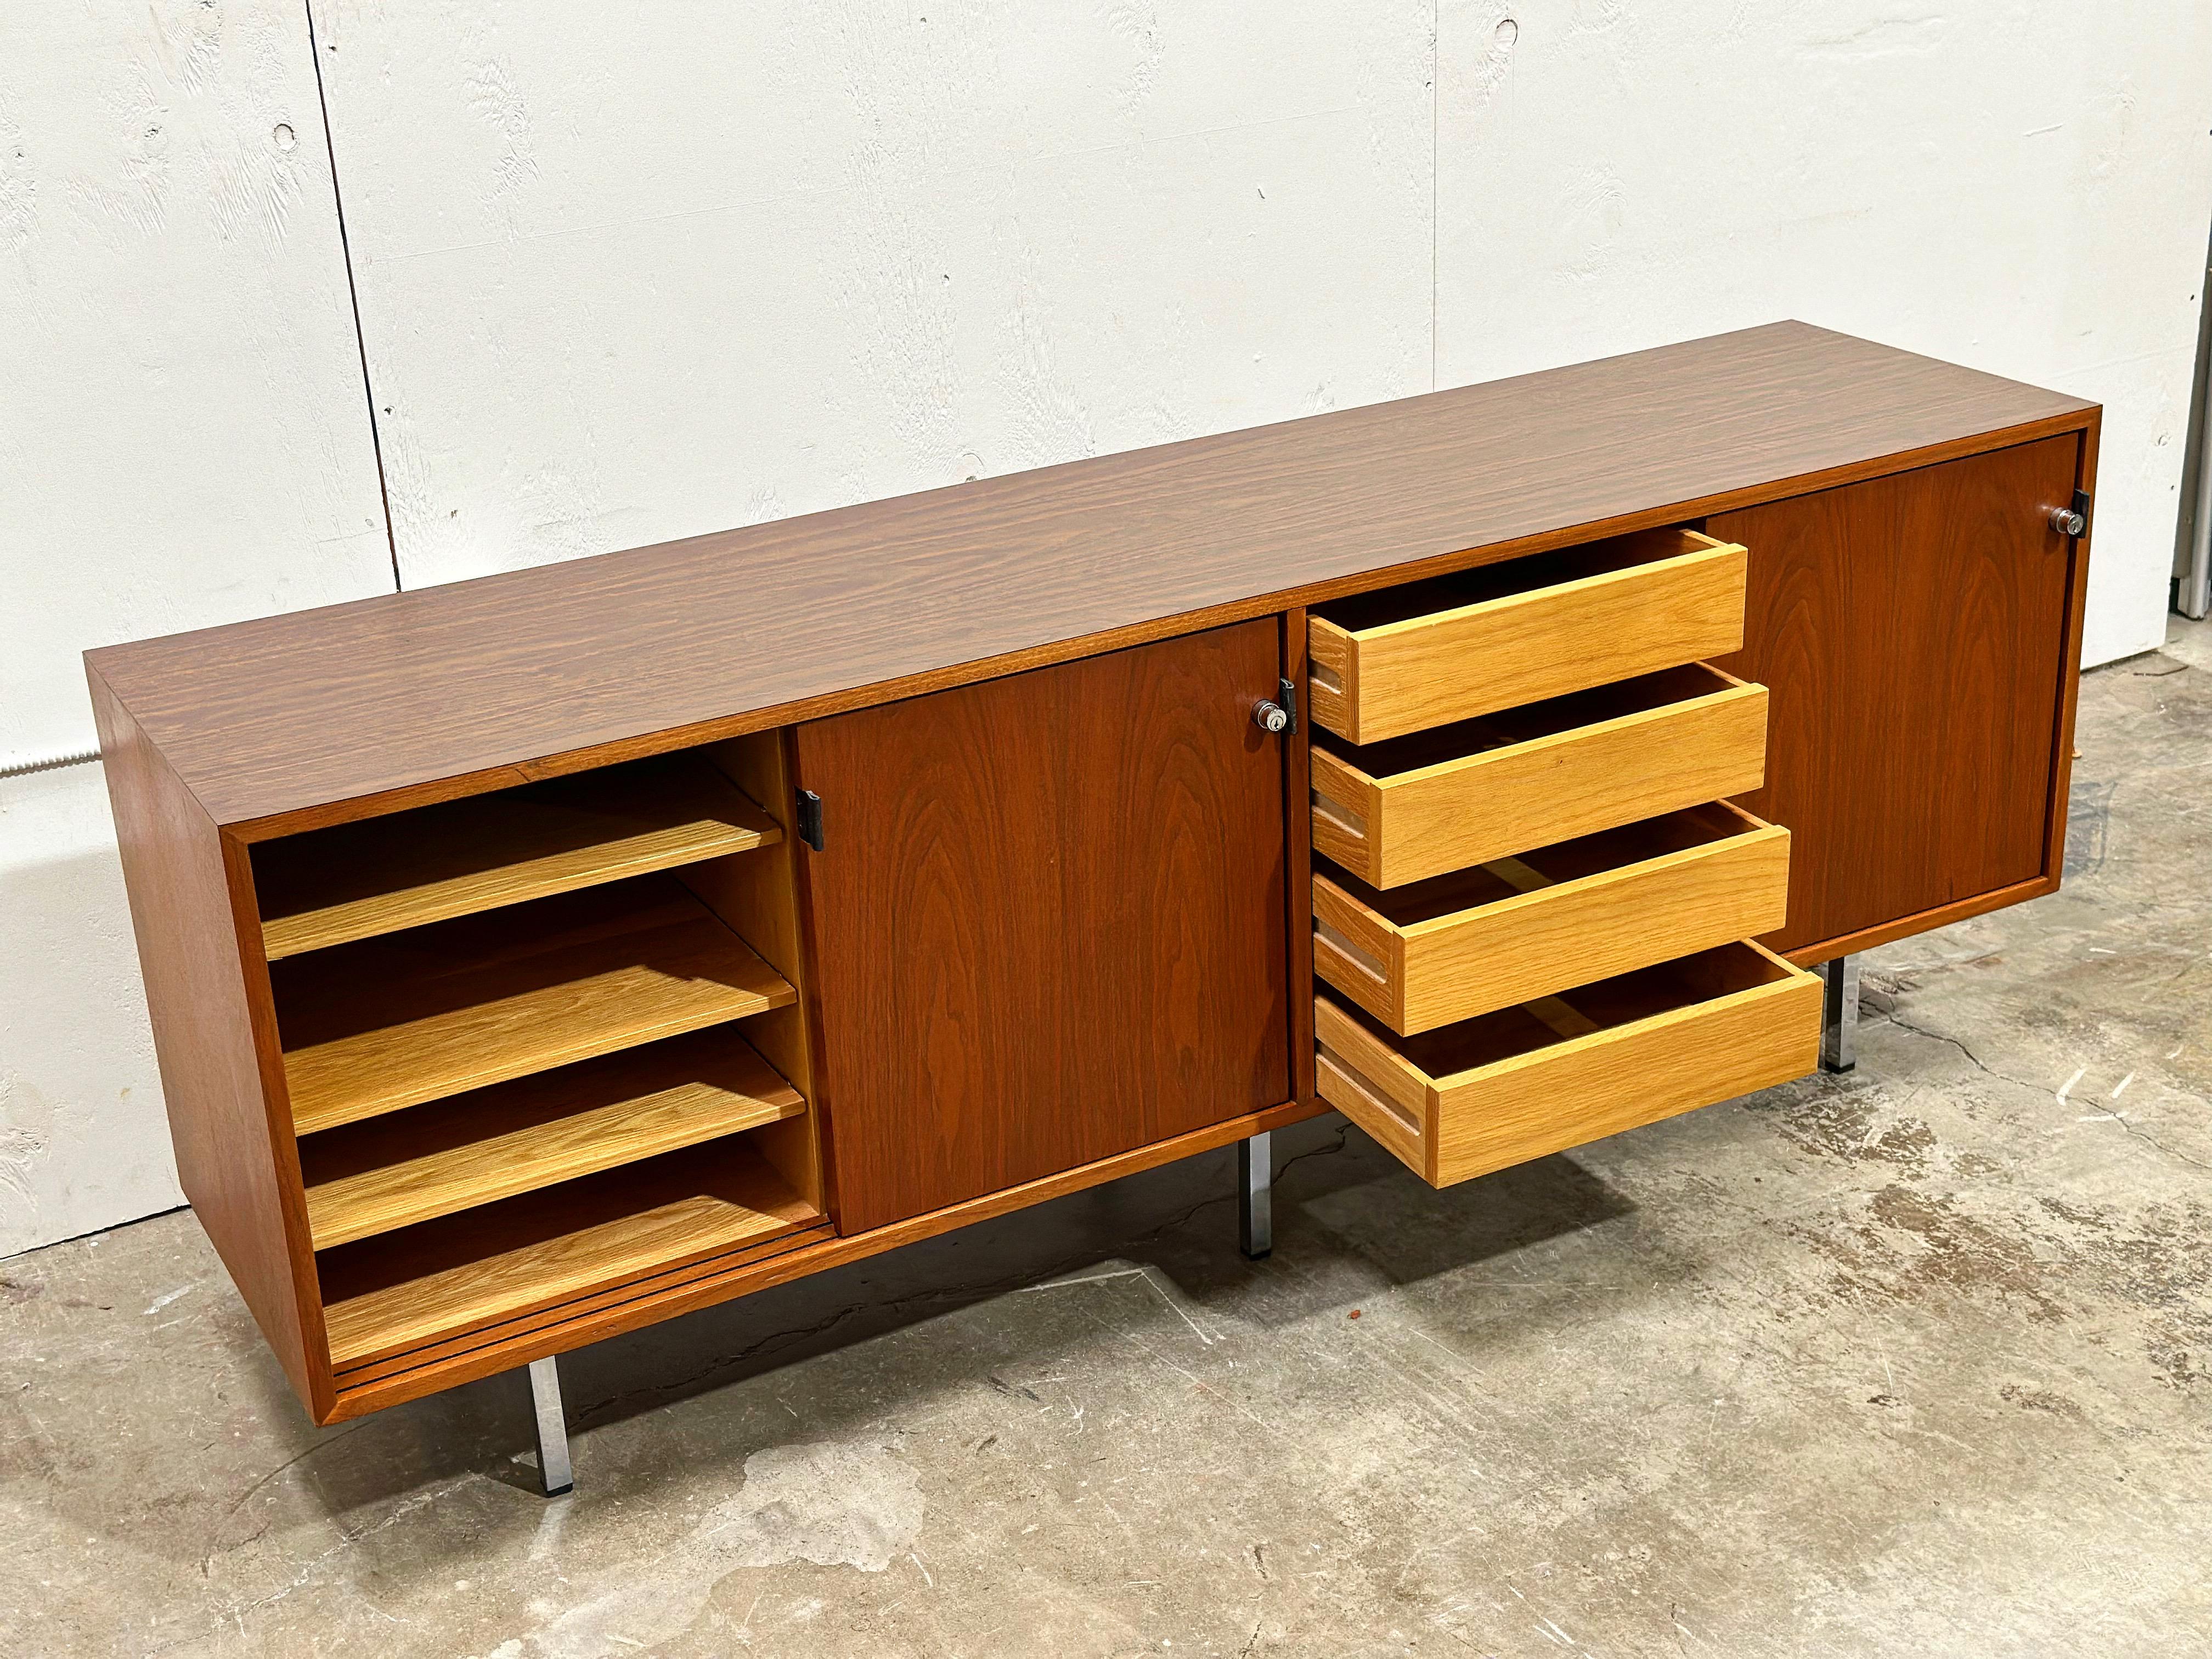 Vintage Midcentury Florence Knoll Credenza - Walnut + Chrome + Leather For Sale 2